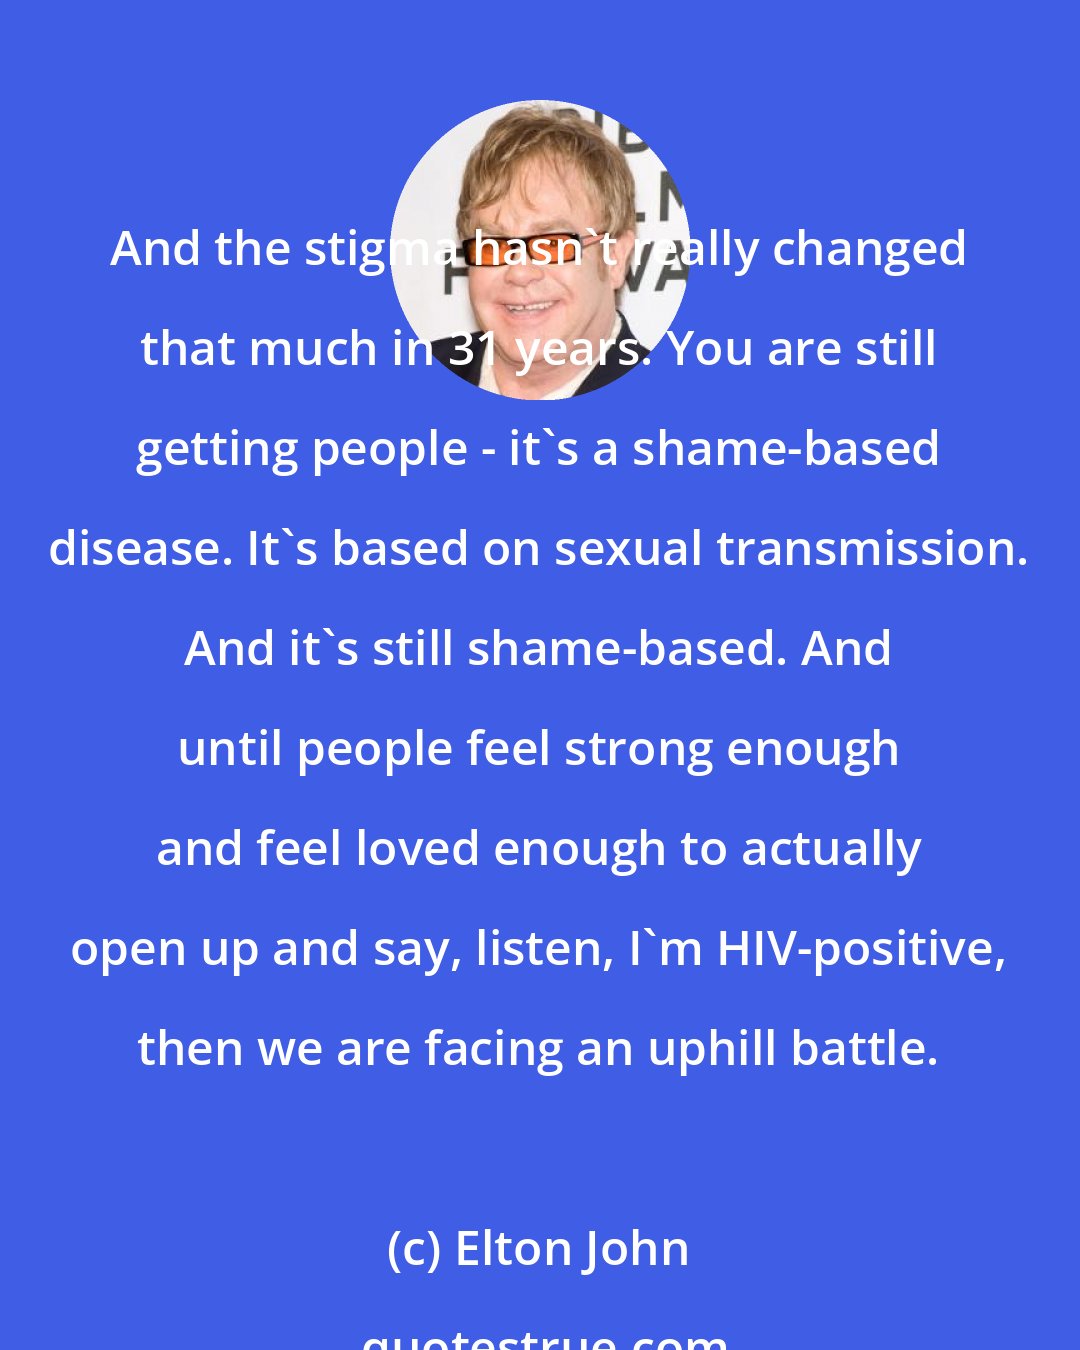 Elton John: And the stigma hasn't really changed that much in 31 years. You are still getting people - it's a shame-based disease. It's based on sexual transmission. And it's still shame-based. And until people feel strong enough and feel loved enough to actually open up and say, listen, I'm HIV-positive, then we are facing an uphill battle.